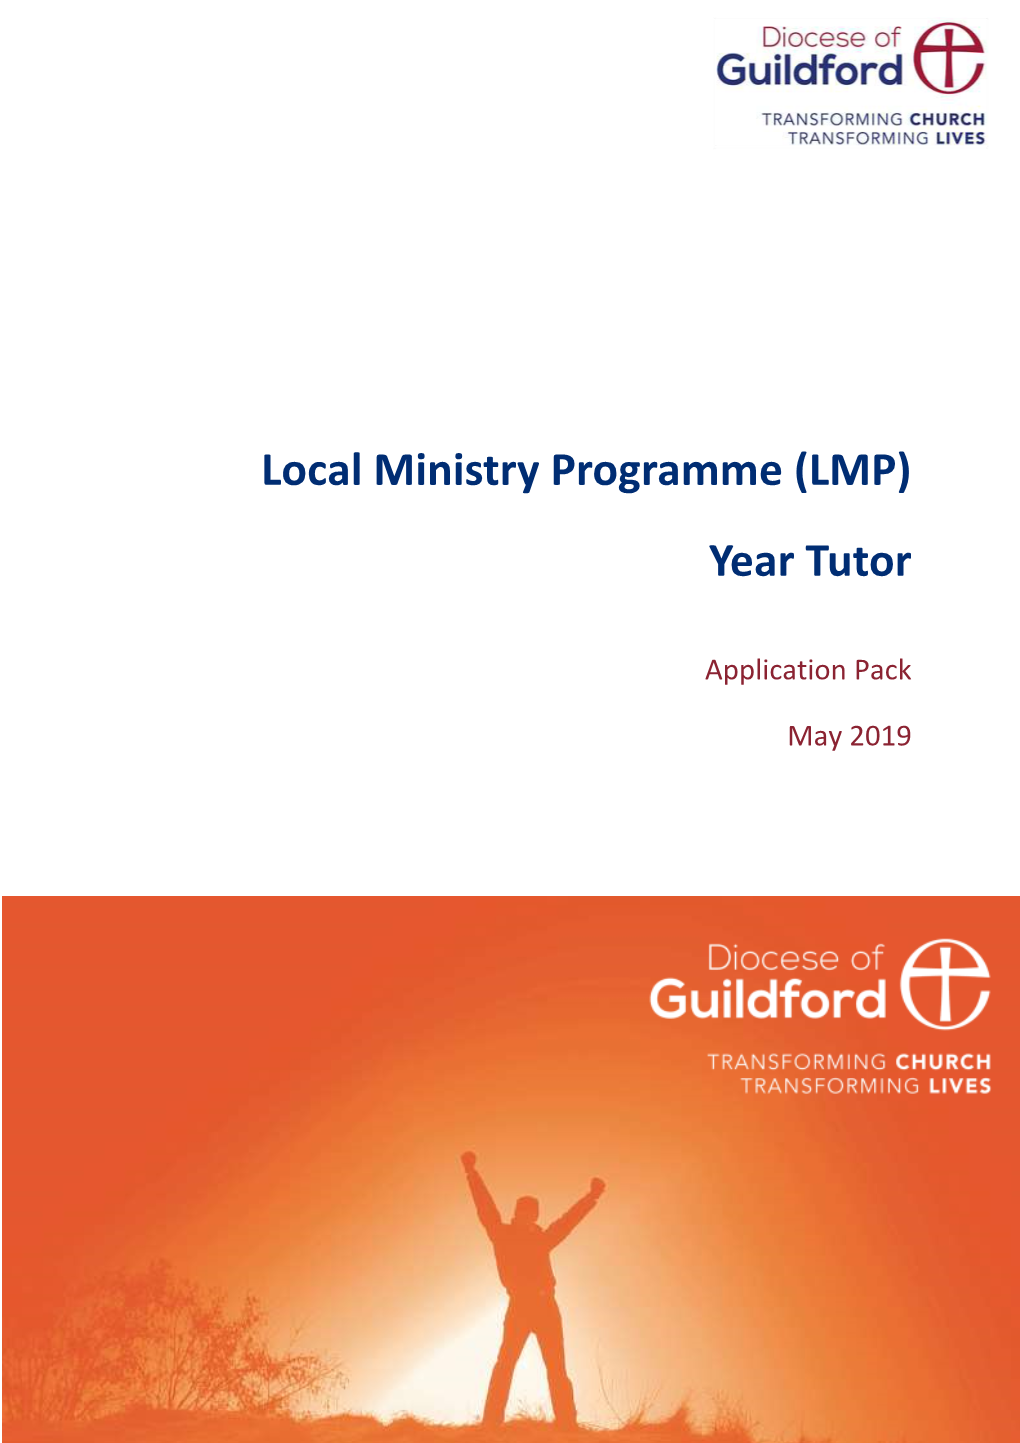 Local Ministry Programme (LMP) Year Tutor